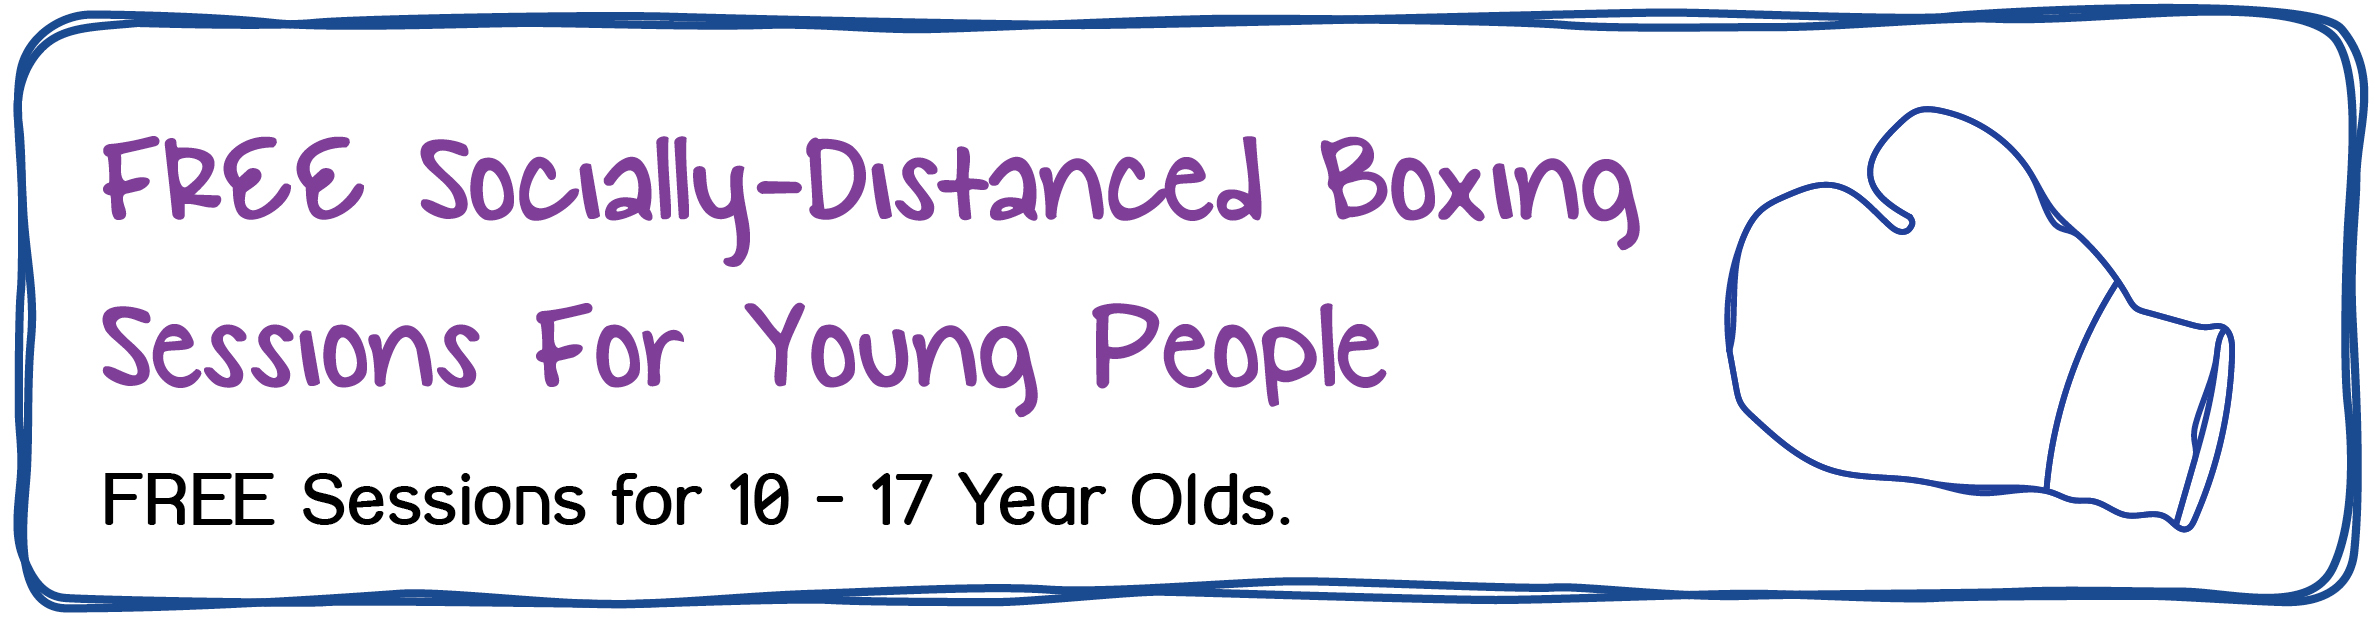 FREE Socially-Distanced Boxing Sessions for Young People. FREE Sessions for 10-17 yrs old.